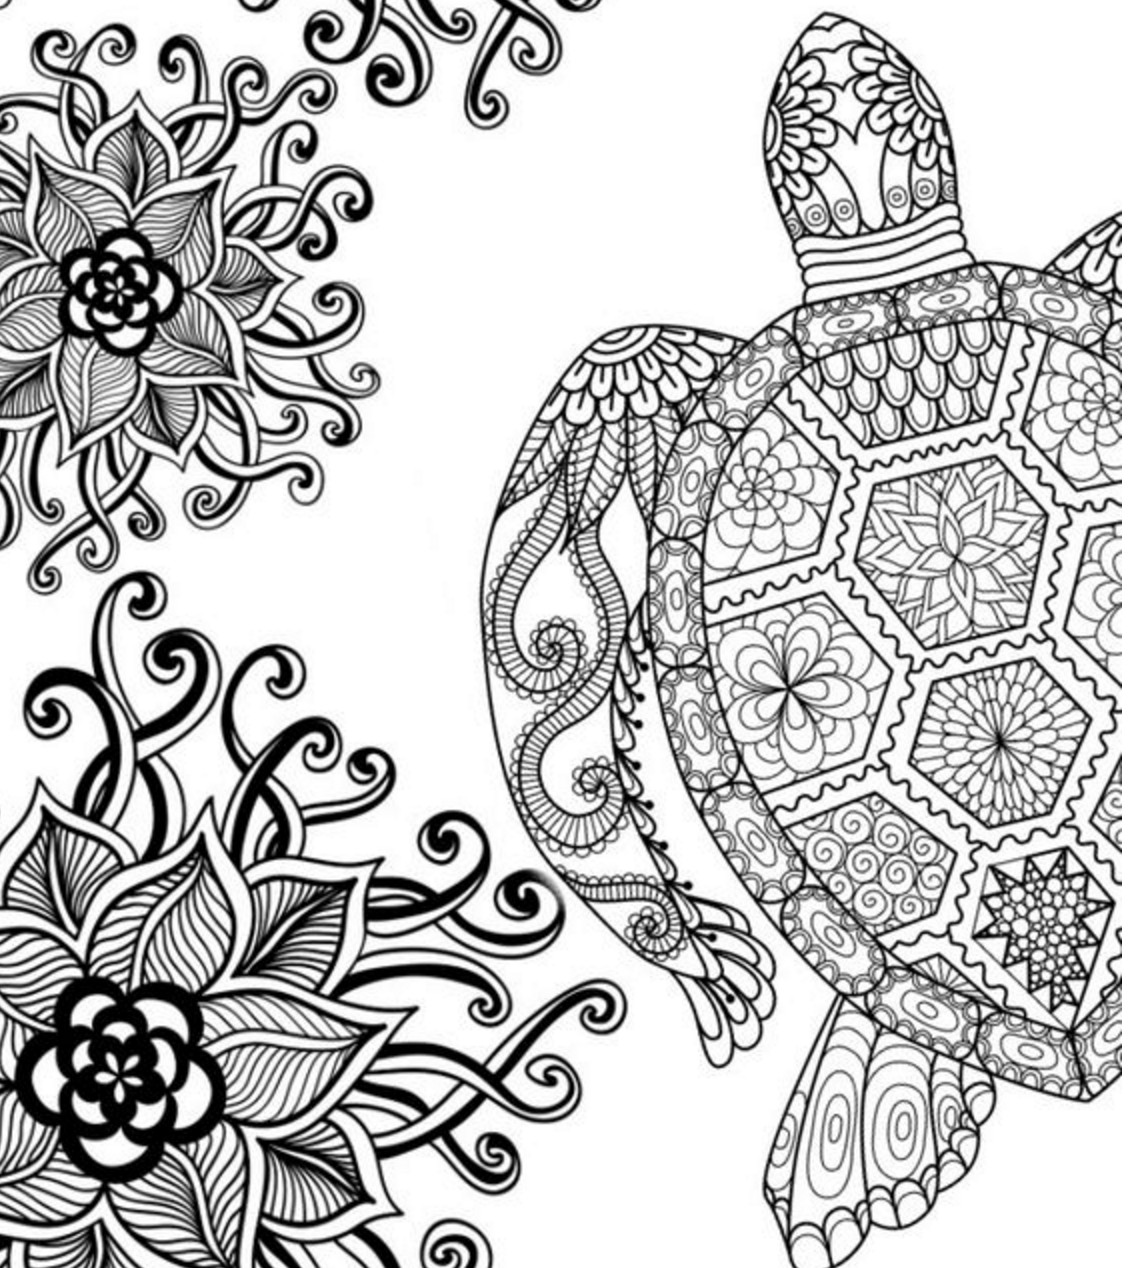 Coloring Pages Adults
 20 Free Adult Colouring Pages The Organised Housewife